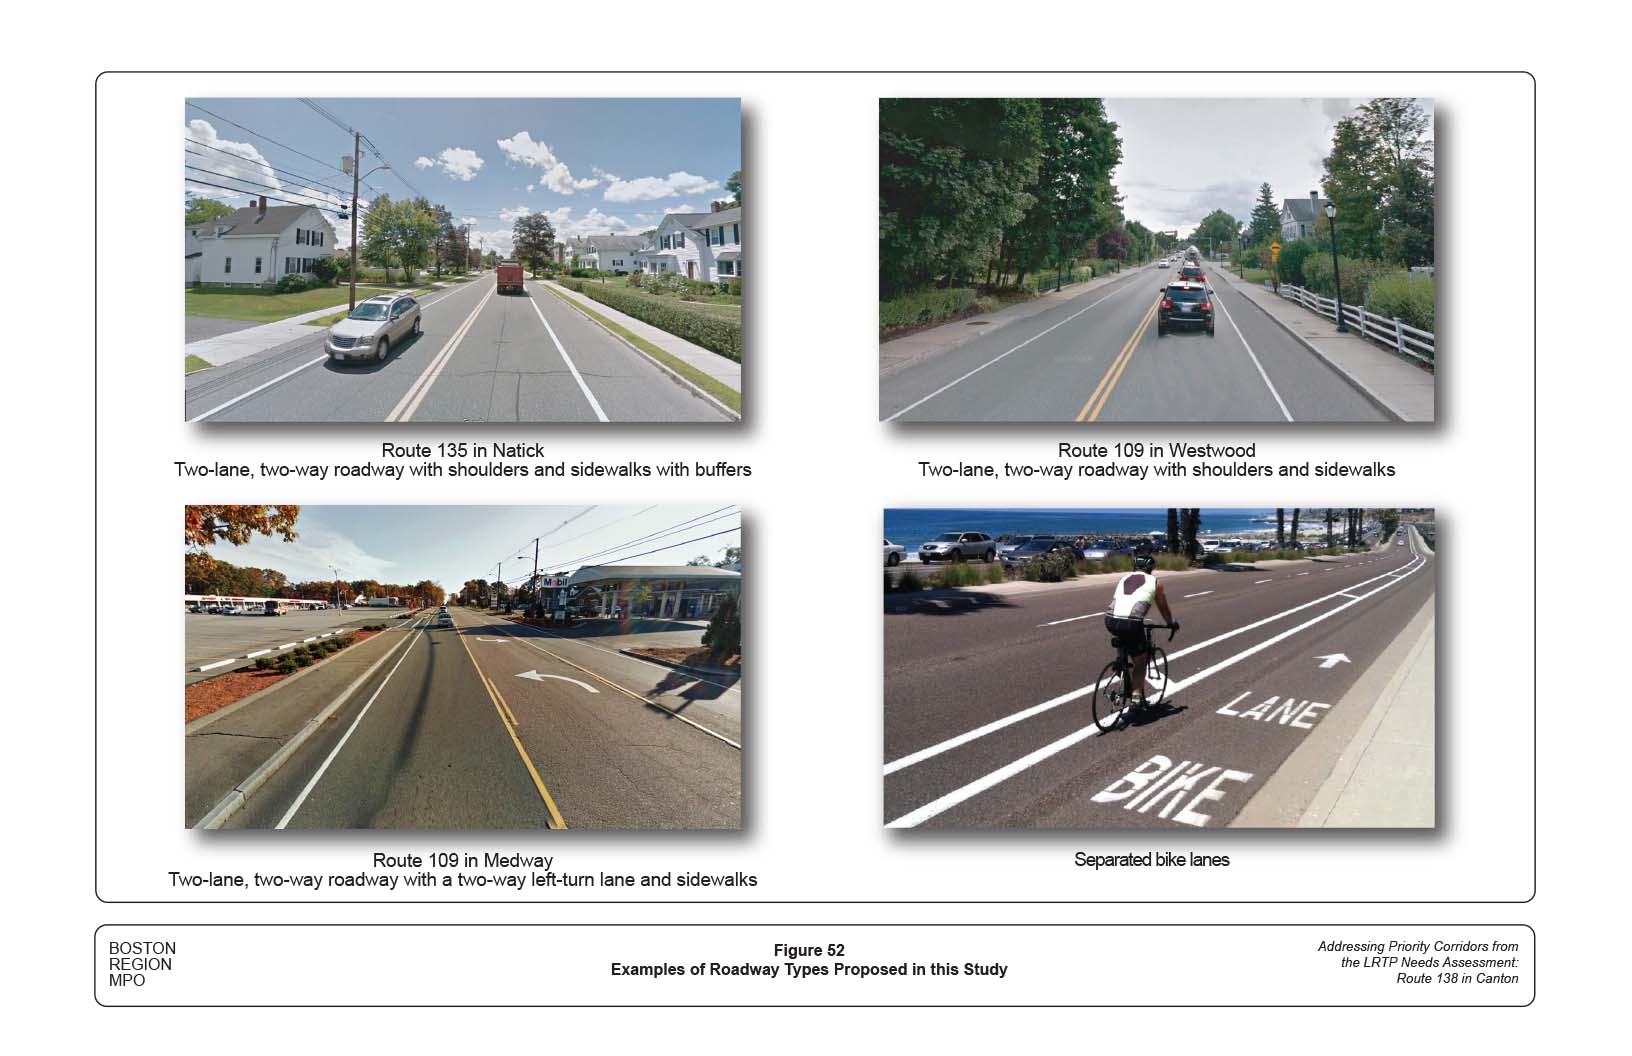 Figure 52 contains four photographs showing examples of roadway types proposed in this study.